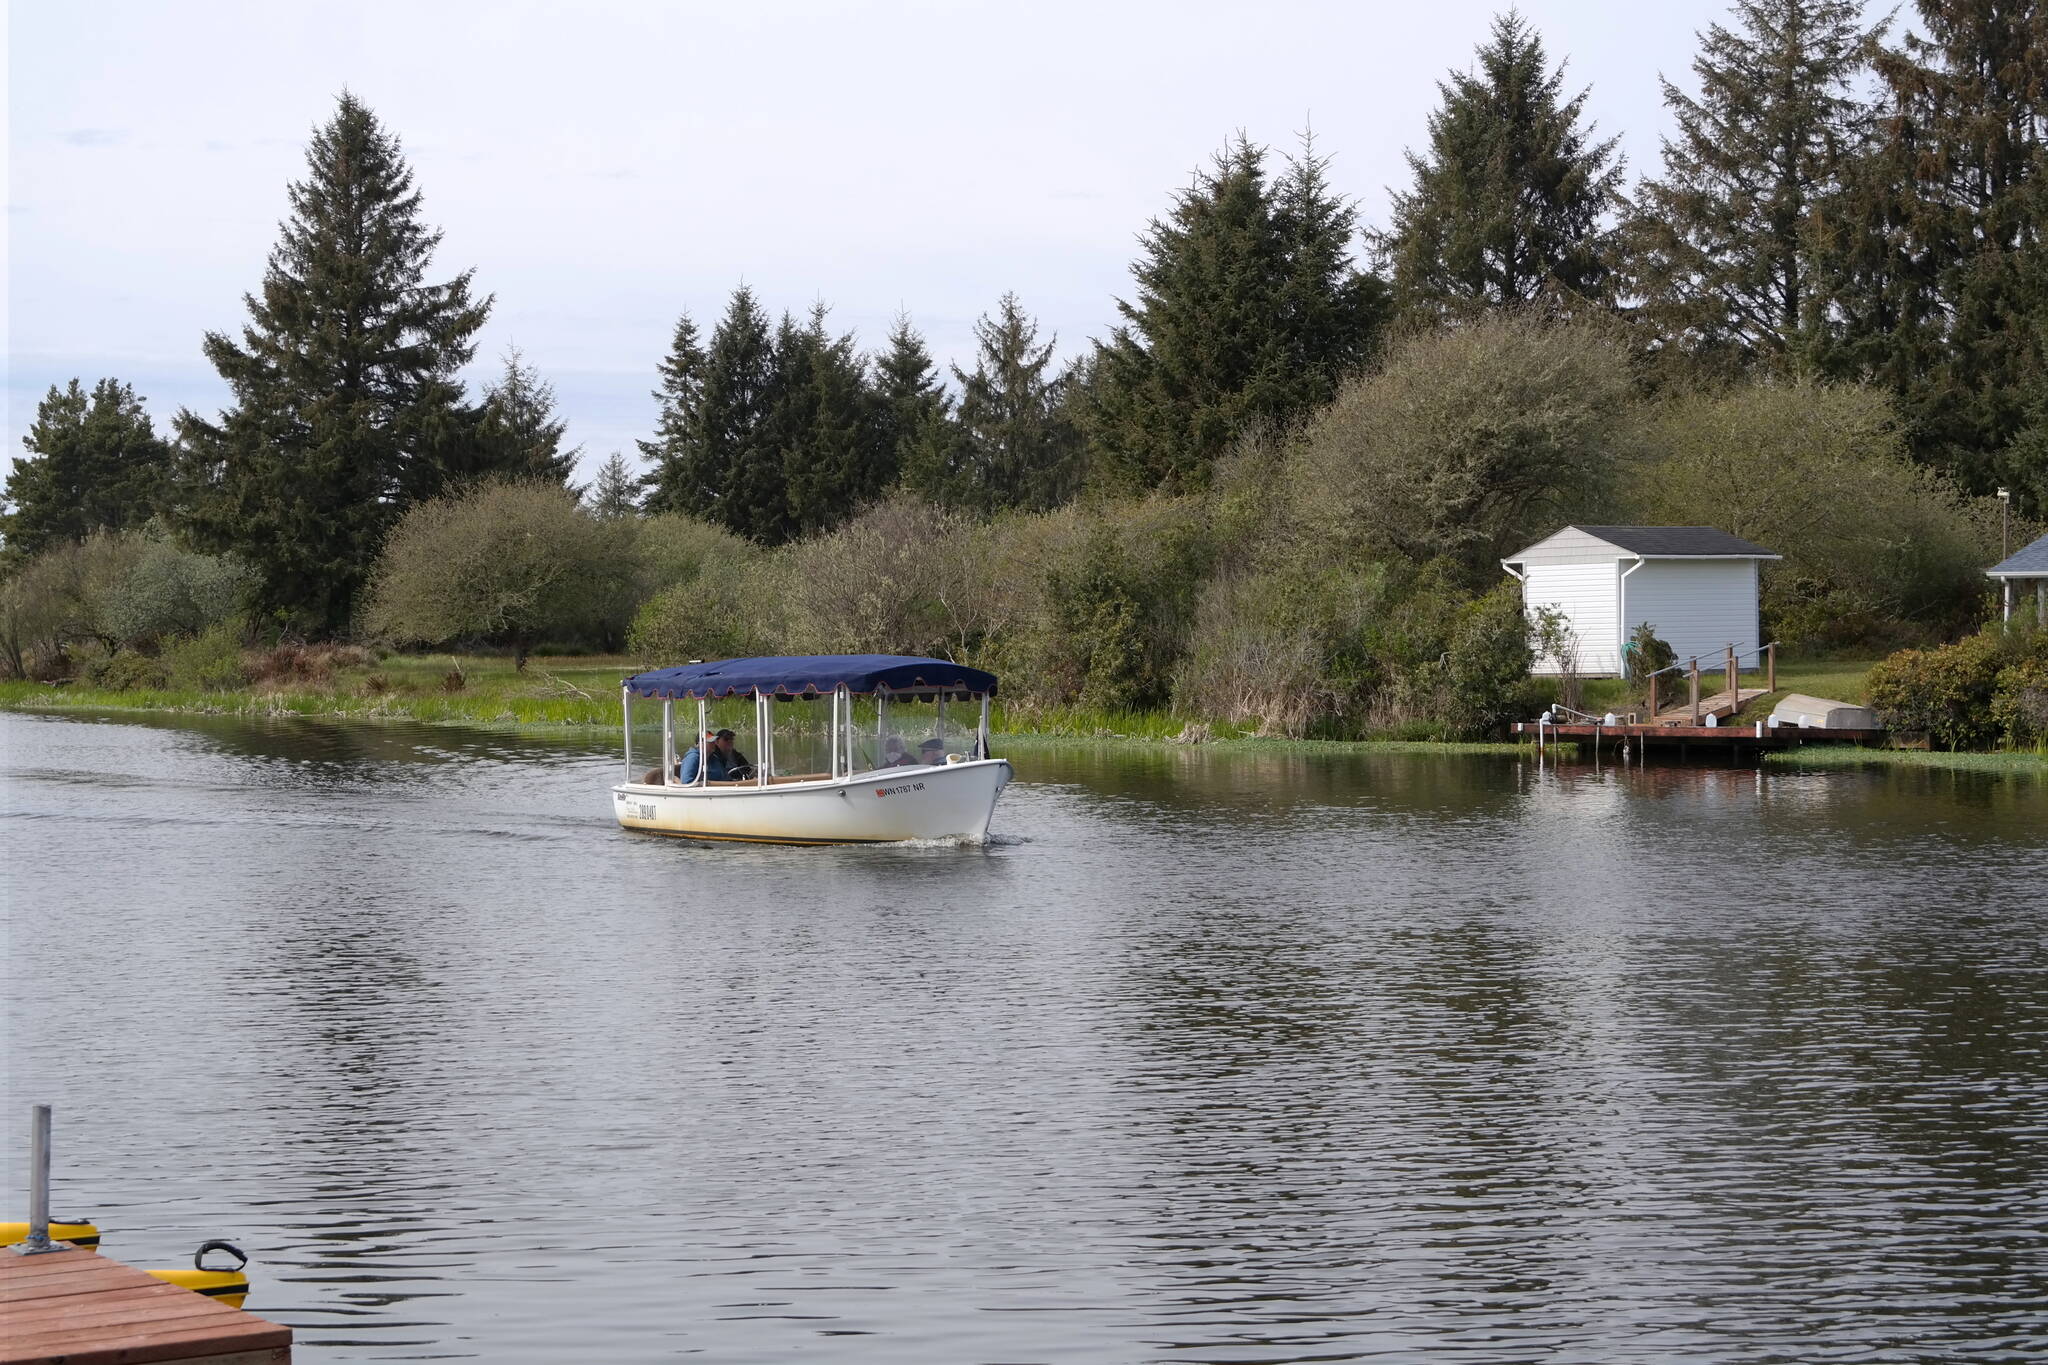 The Ocean Shores Fresh Waterways are a spot for aquatic recreation, including kayaking, paddleboarding, and boating. Those heading out to enjoy the lakes and canals should be aware of a seasonal toxic algae bloom. Erika Gebhardt I The Daily World